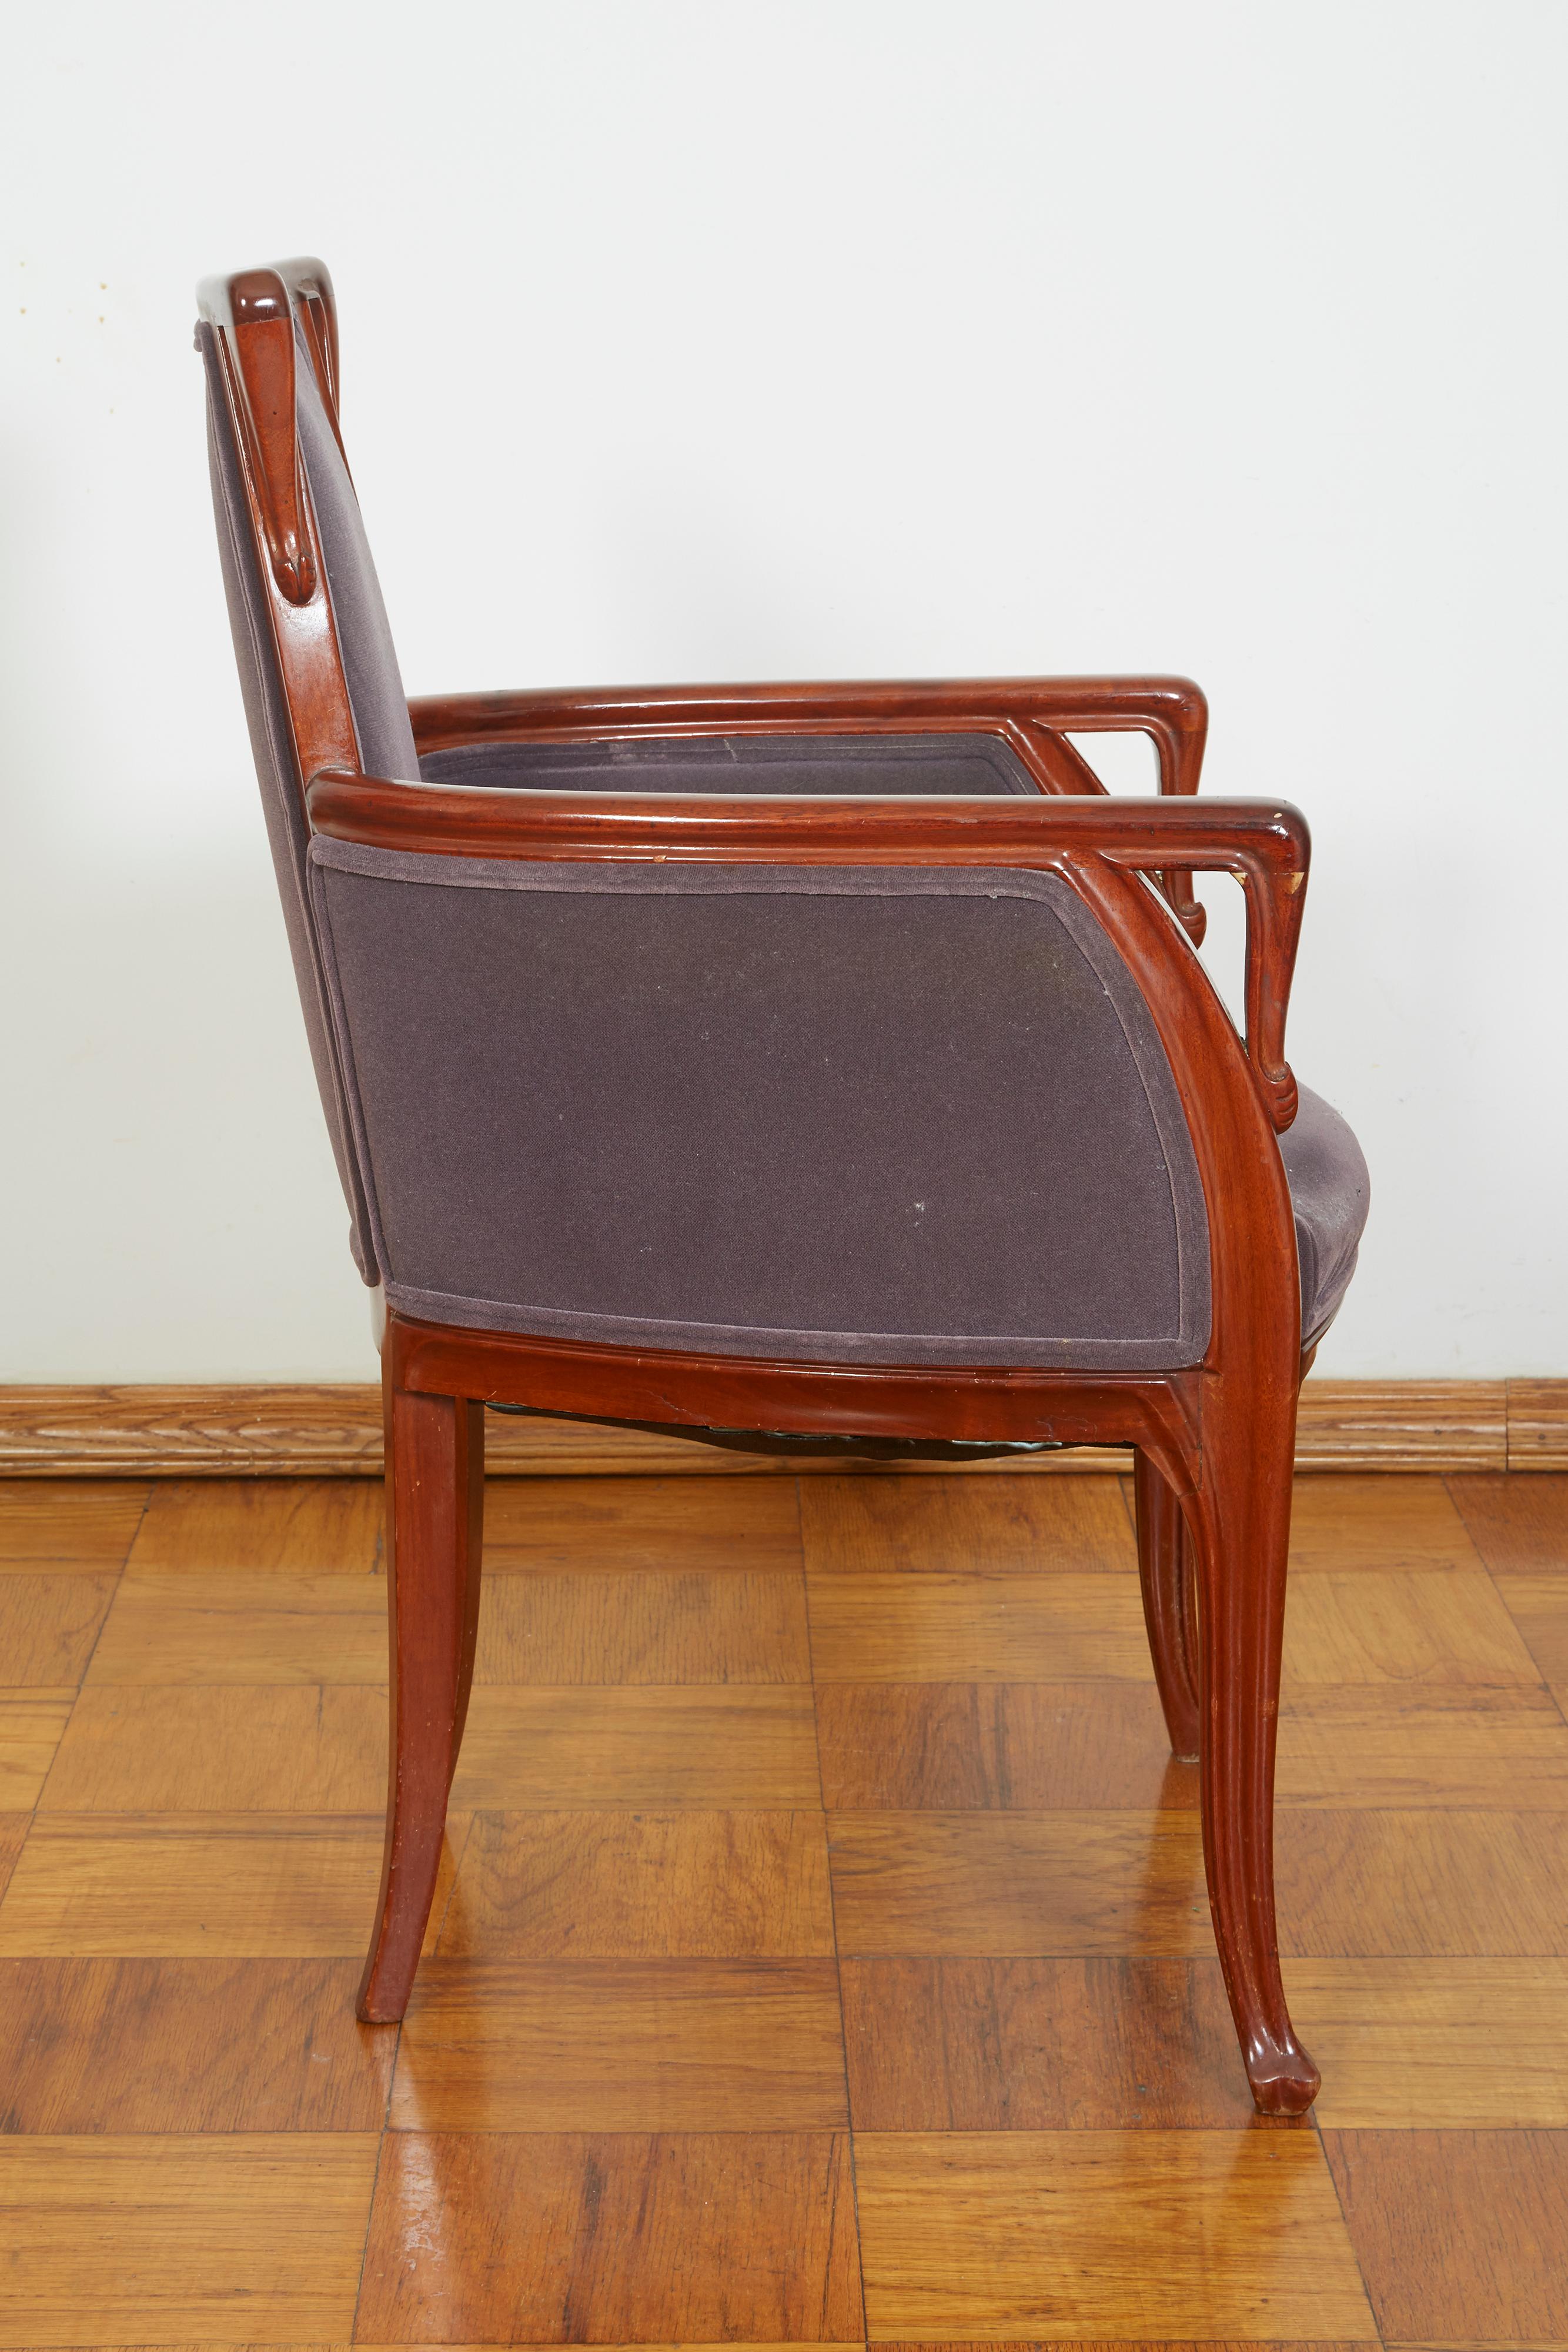 French Art Nouveau Armchair by Louis Majorelle In Good Condition For Sale In Bridgewater, CT